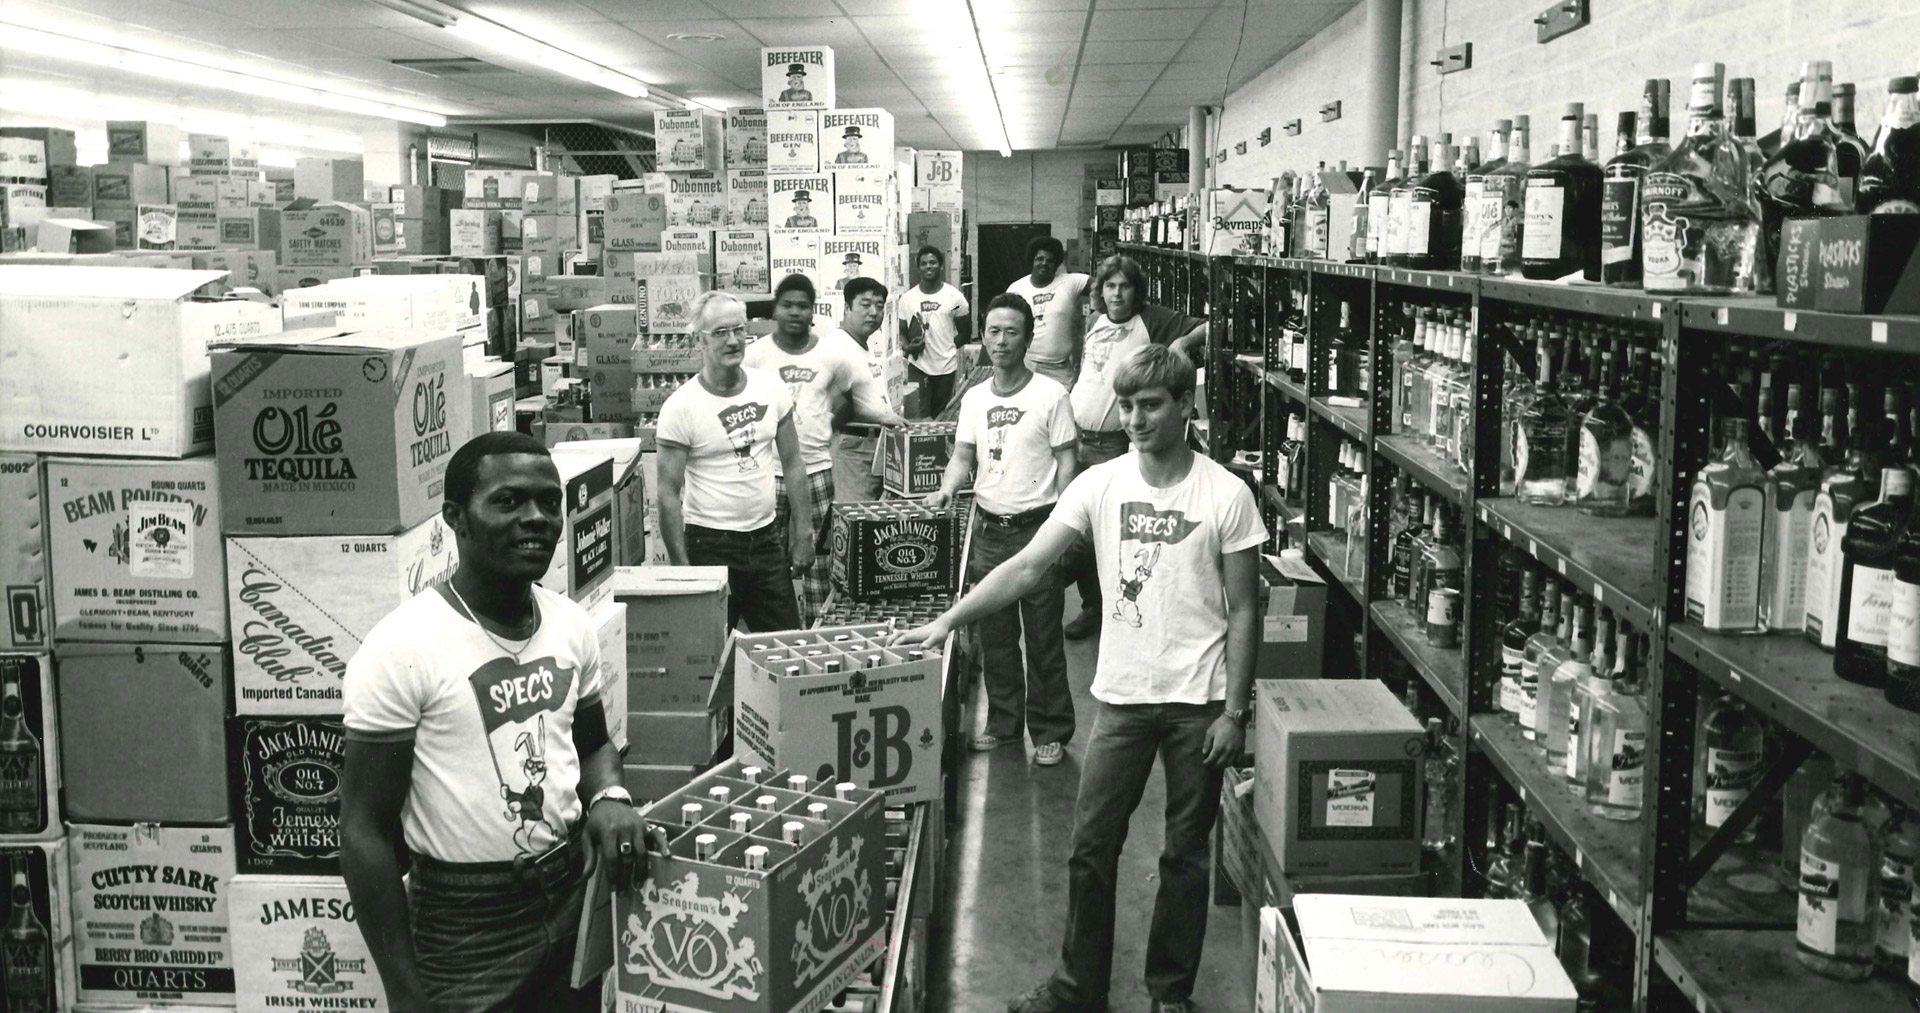 A group of Spec's employees from the early 1970s